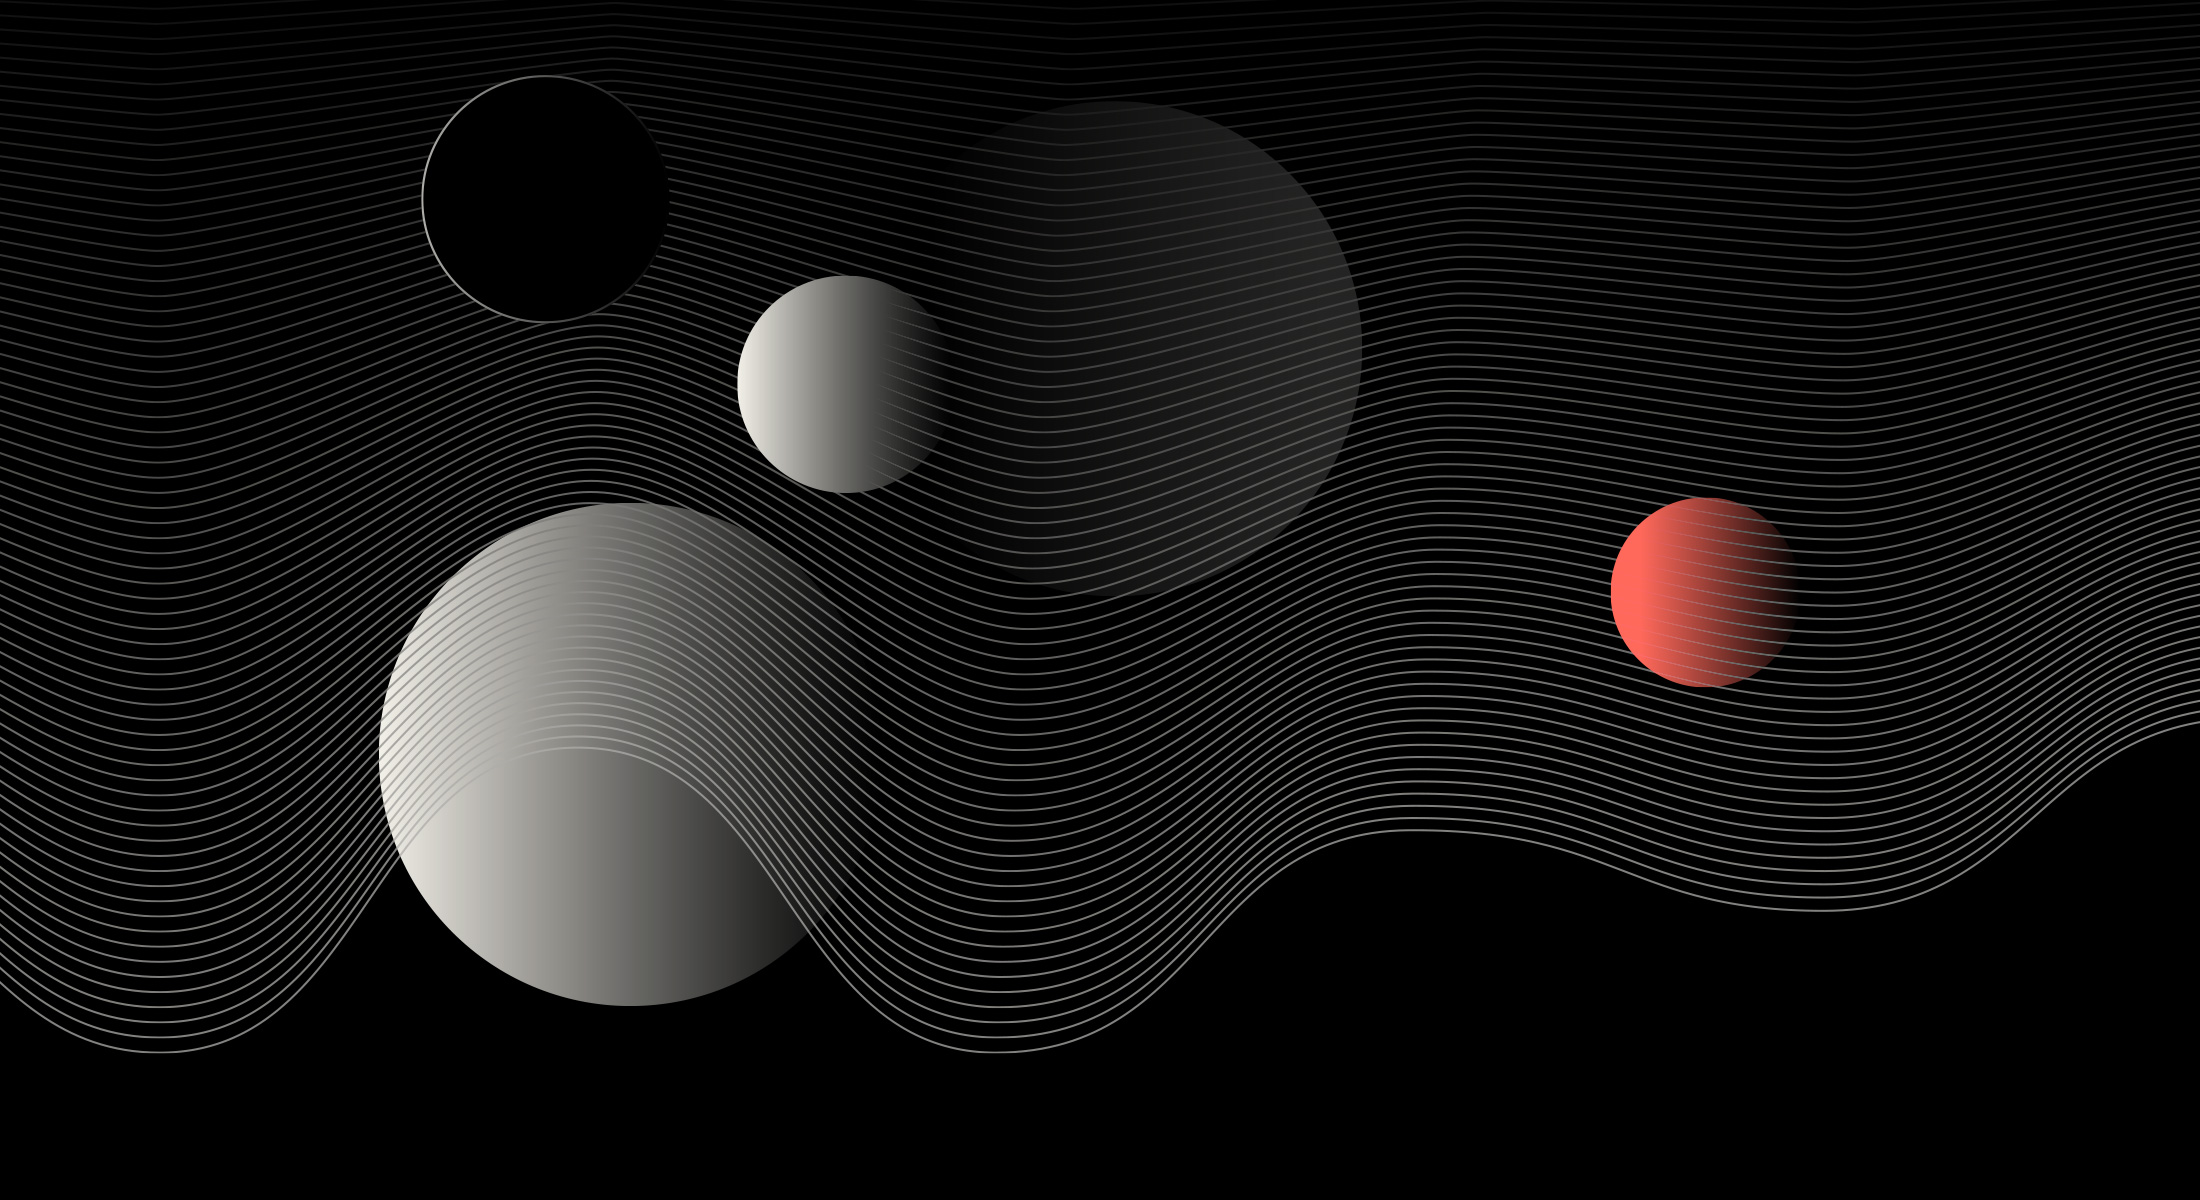 3 spheres in gray and red on a black background with wave design